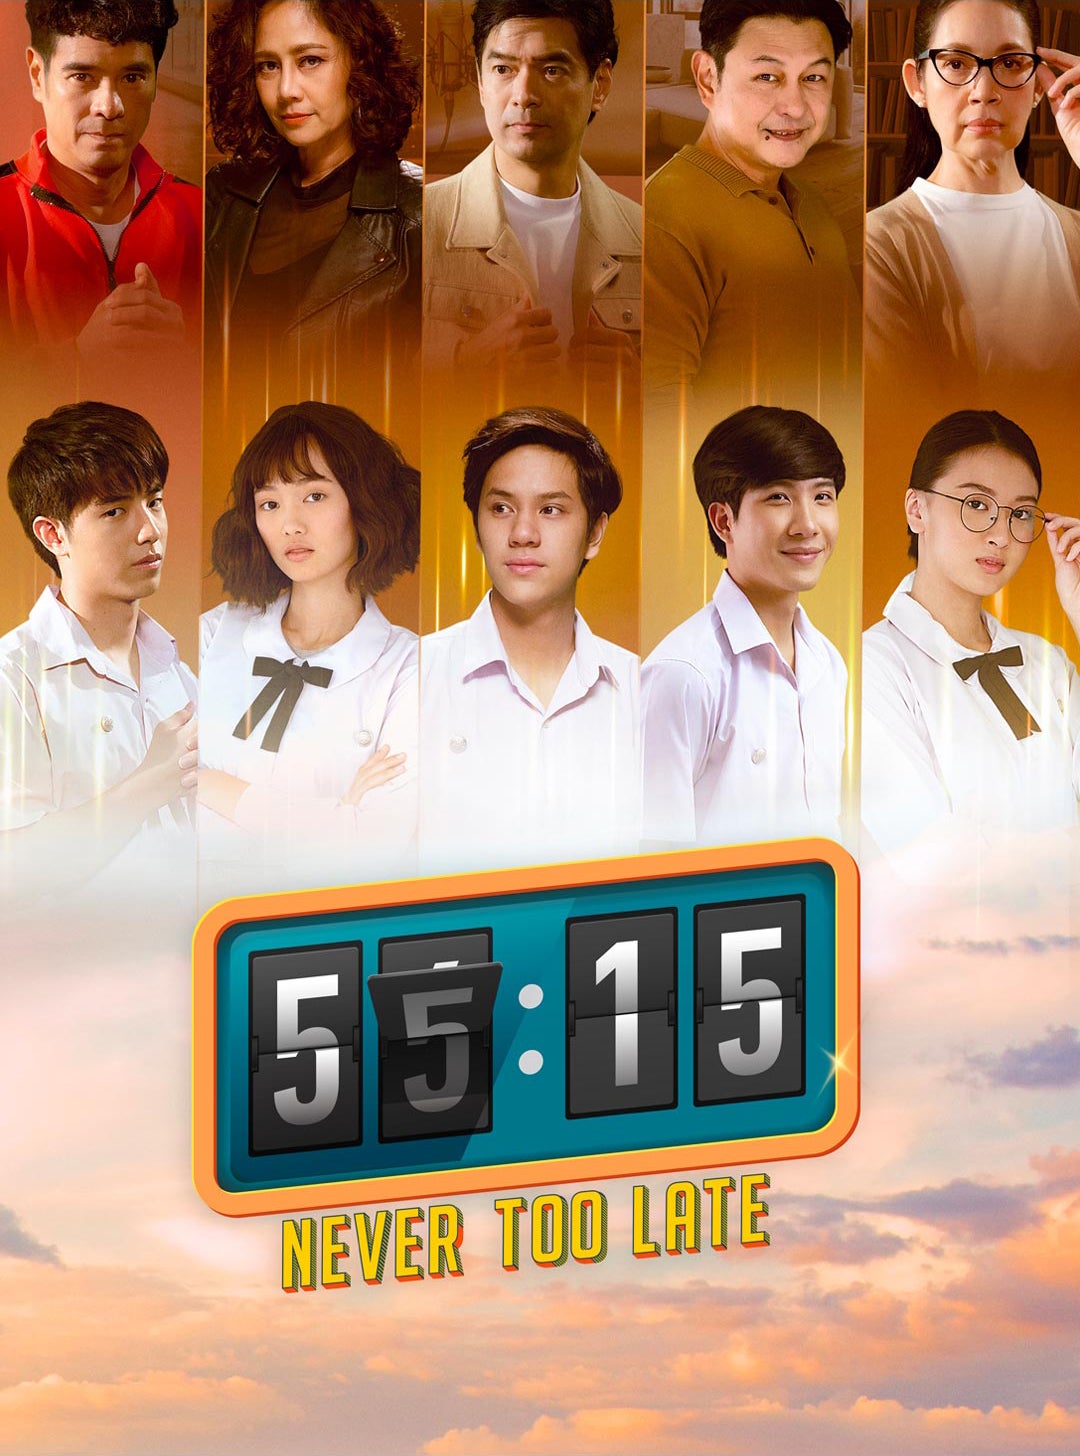 TV ratings for 55:15 Never Too Late in South Korea. Disney+ TV series